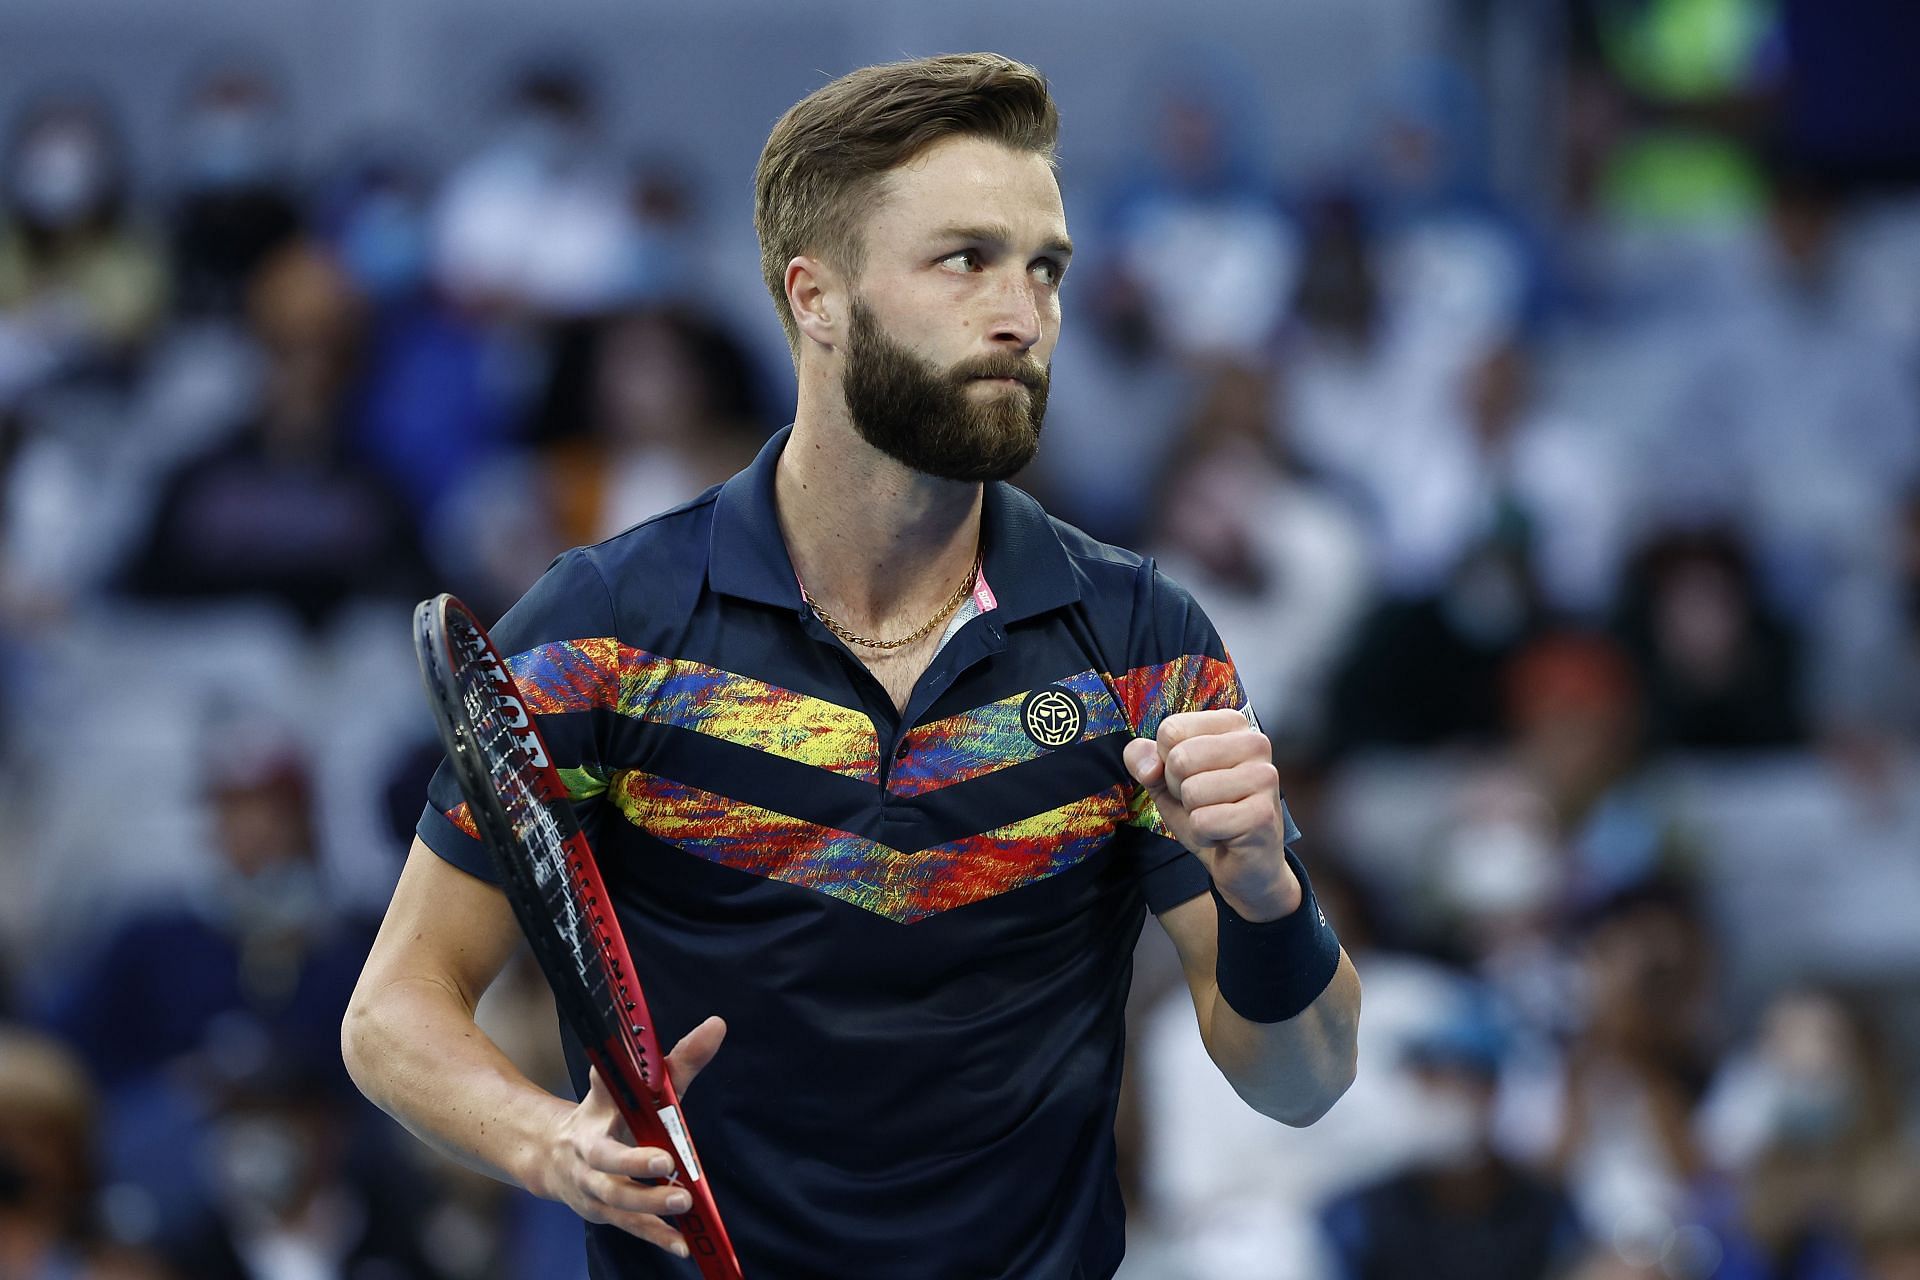 Liam Broady at the 2022 Australian Open